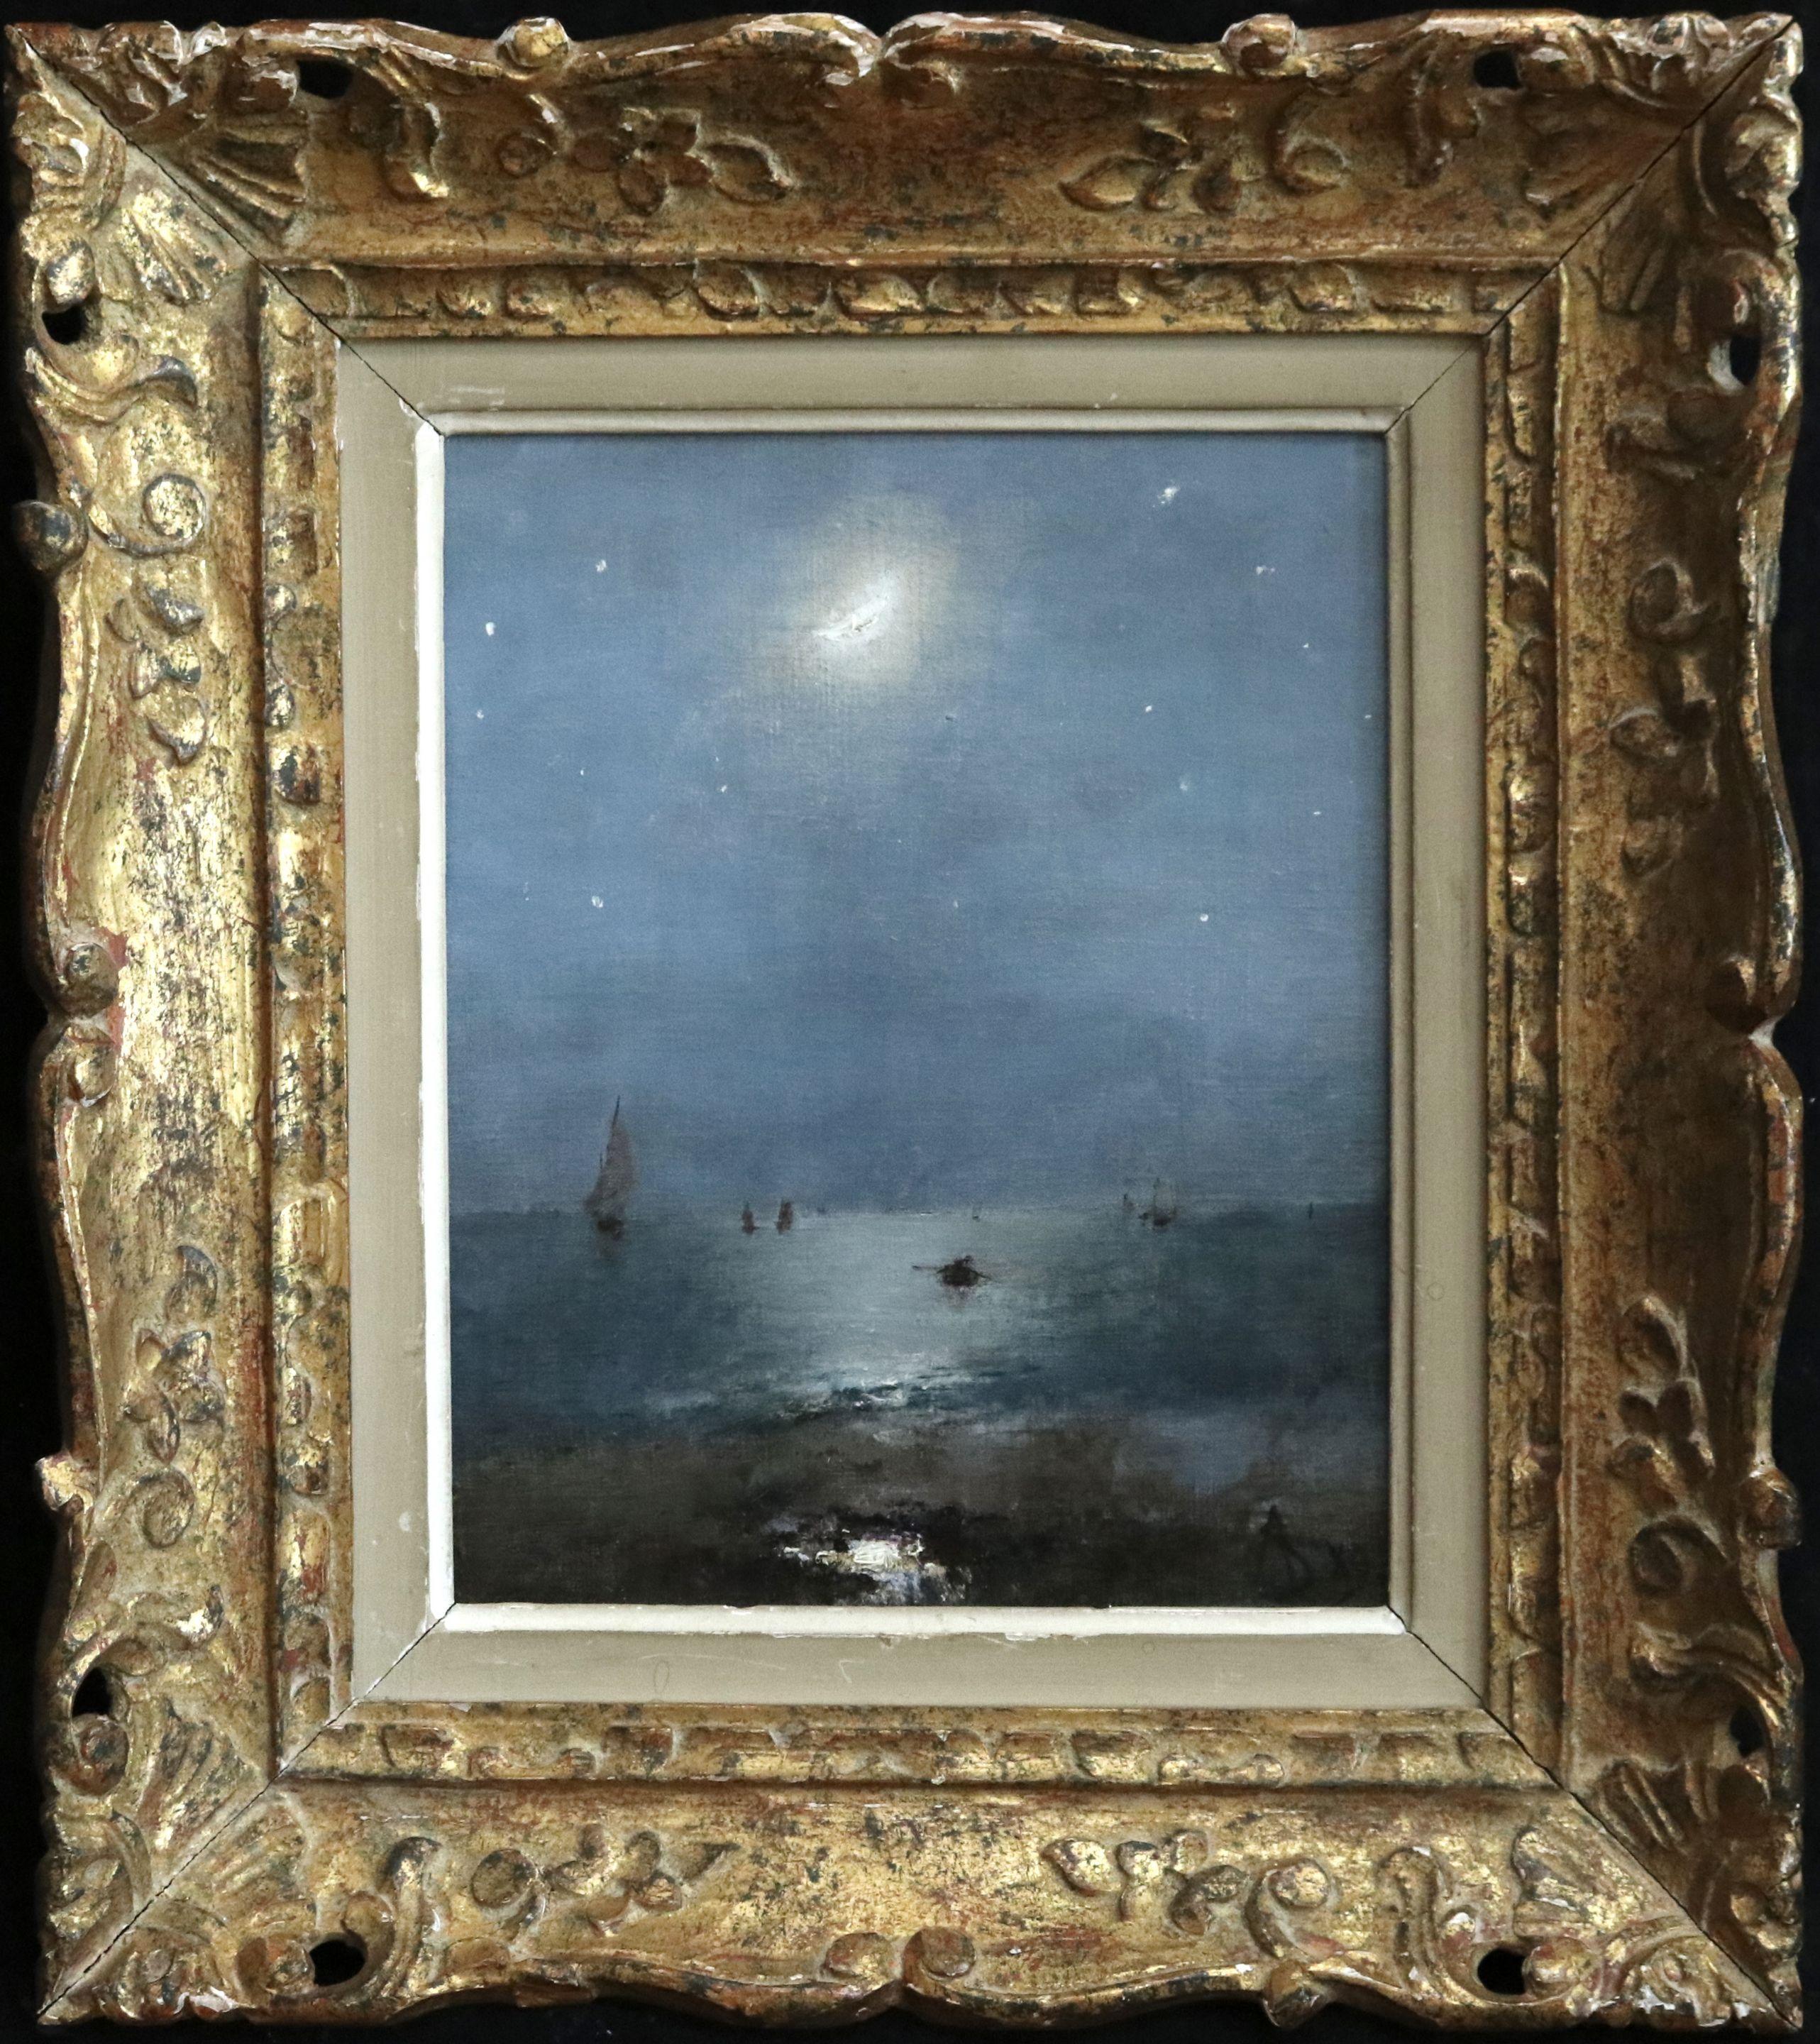 Alfred Émile Léopold Stevens Figurative Painting - The Moon & Stars - 19th Century Oil, Starry Night Sea Landscape - Alfred Stevens